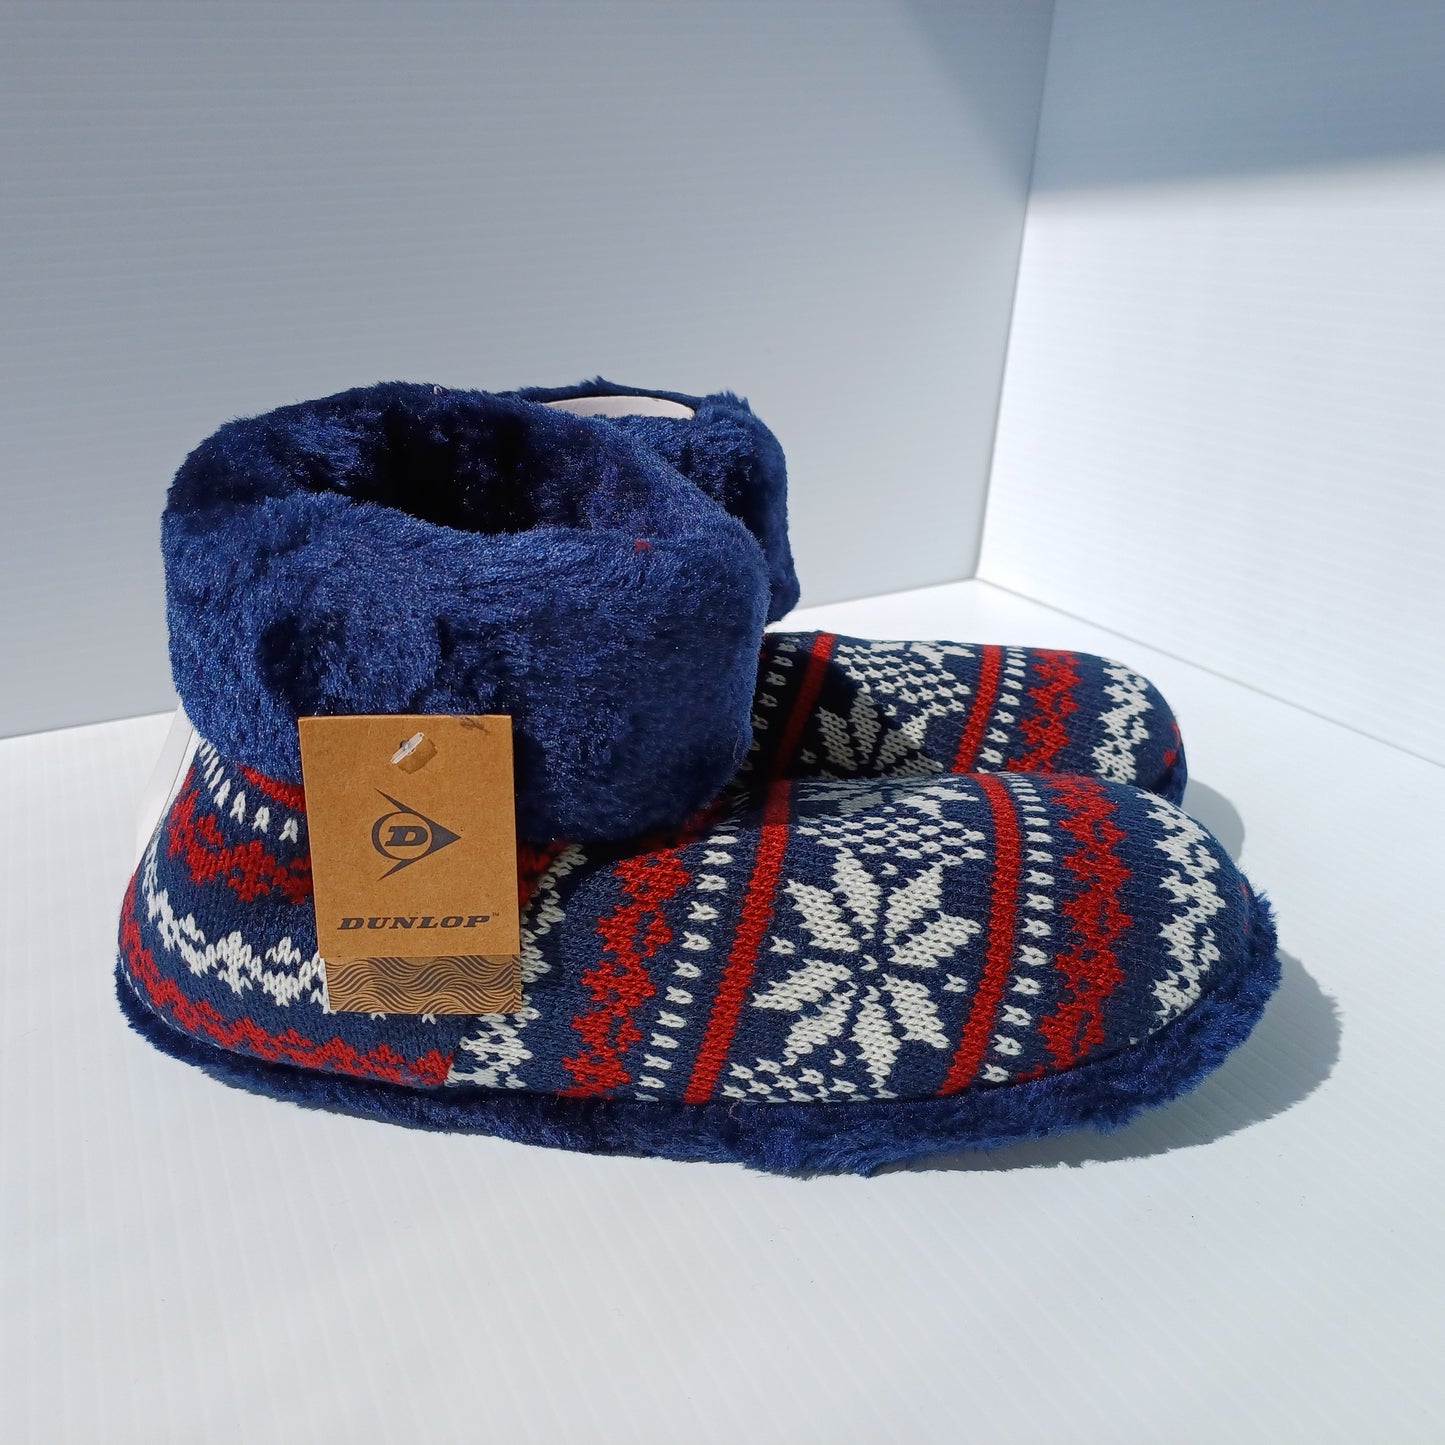 Blue Cozy Slippers